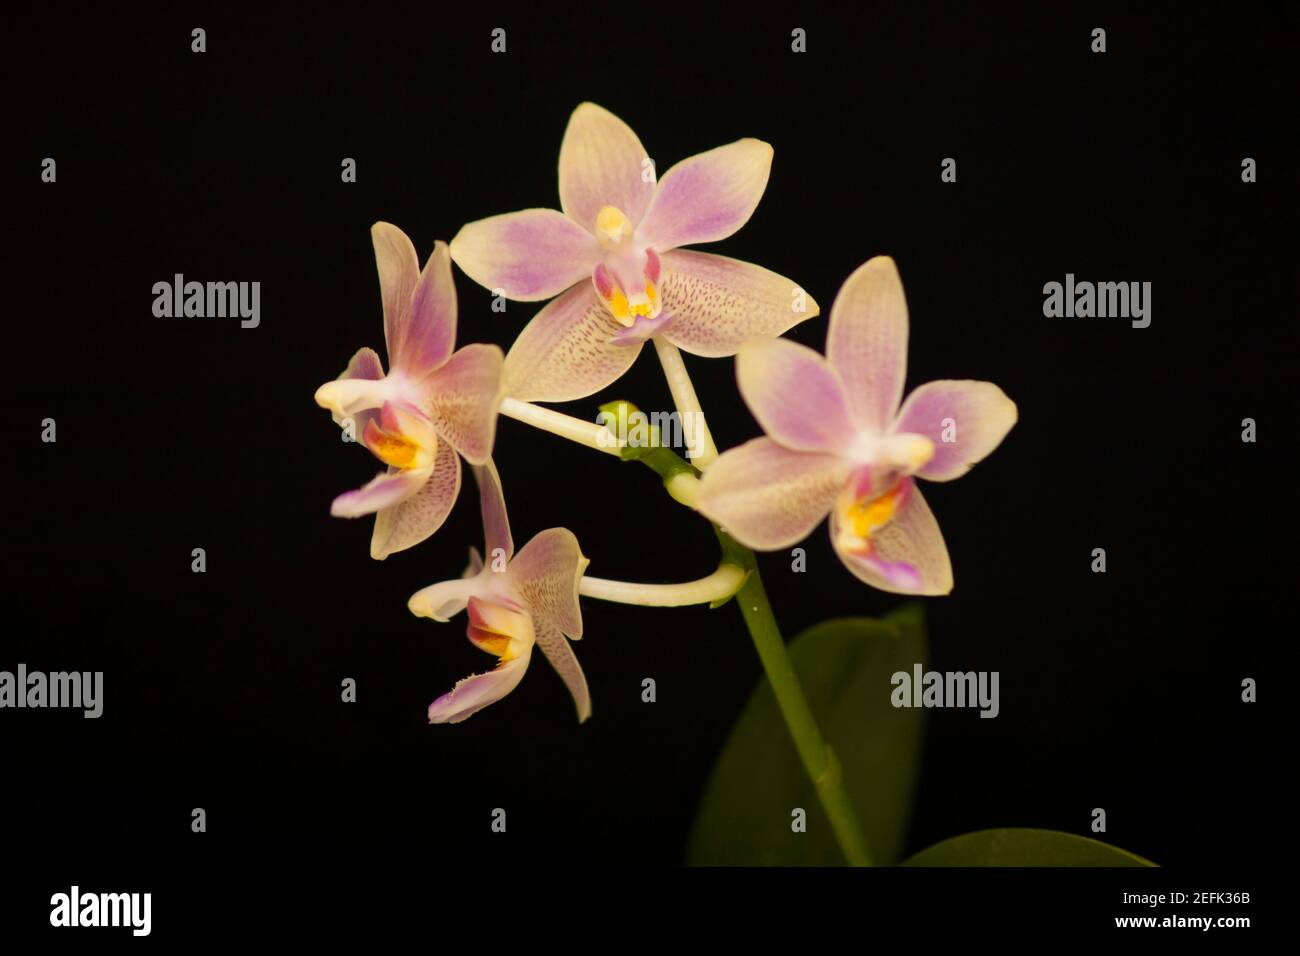 Orchid flowers Phalaenopsis Balm aroma. Branch of flowering Orchid Phalaenopsis Balm aroma (known as butterfly orchids) on a black background Stock Photo